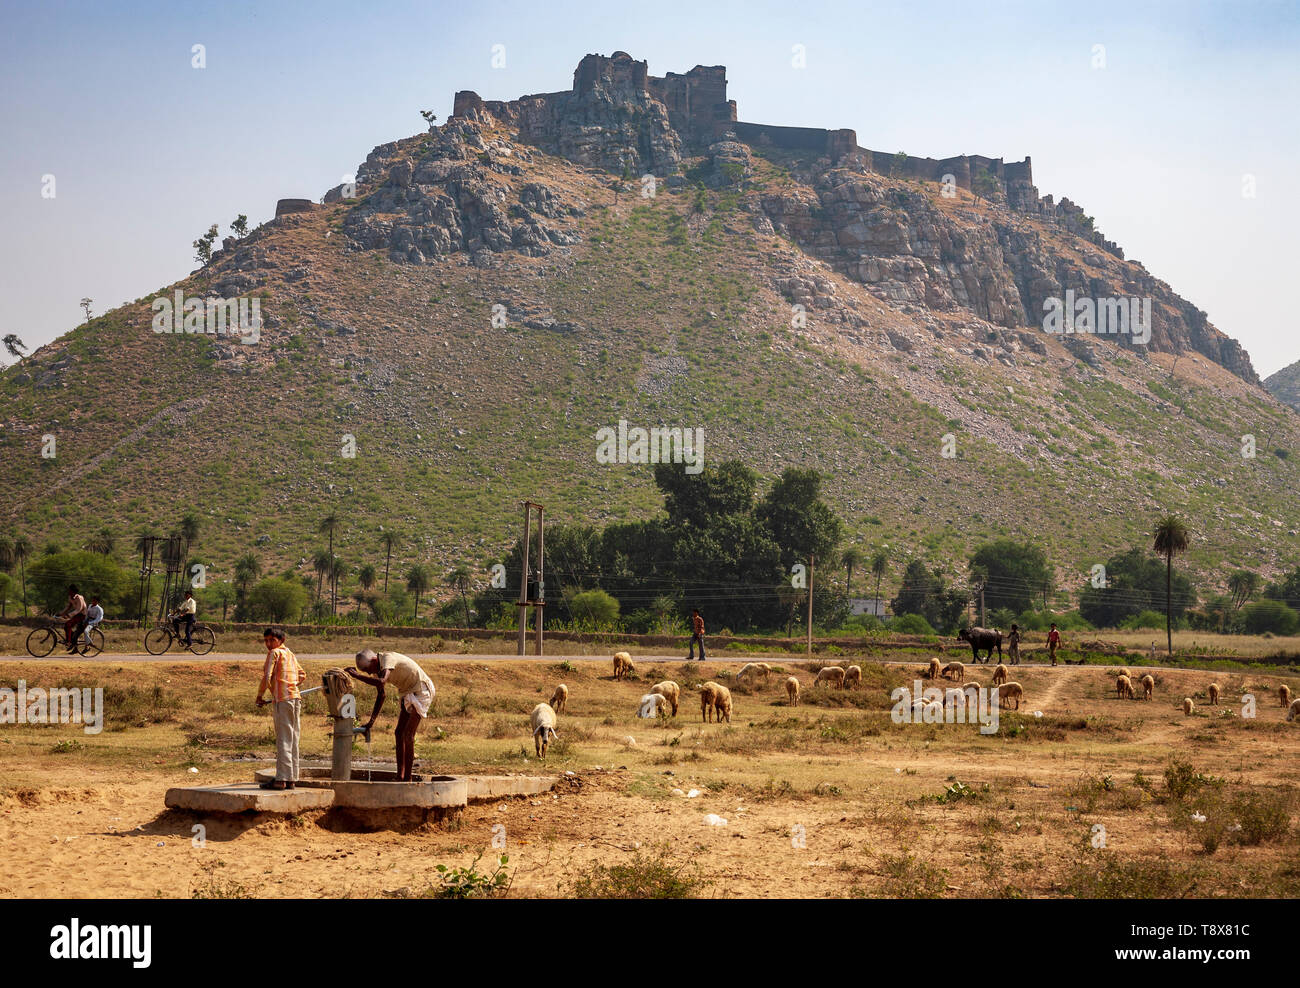 Pumping water from a well in rural Rajasthan, India Stock Photo